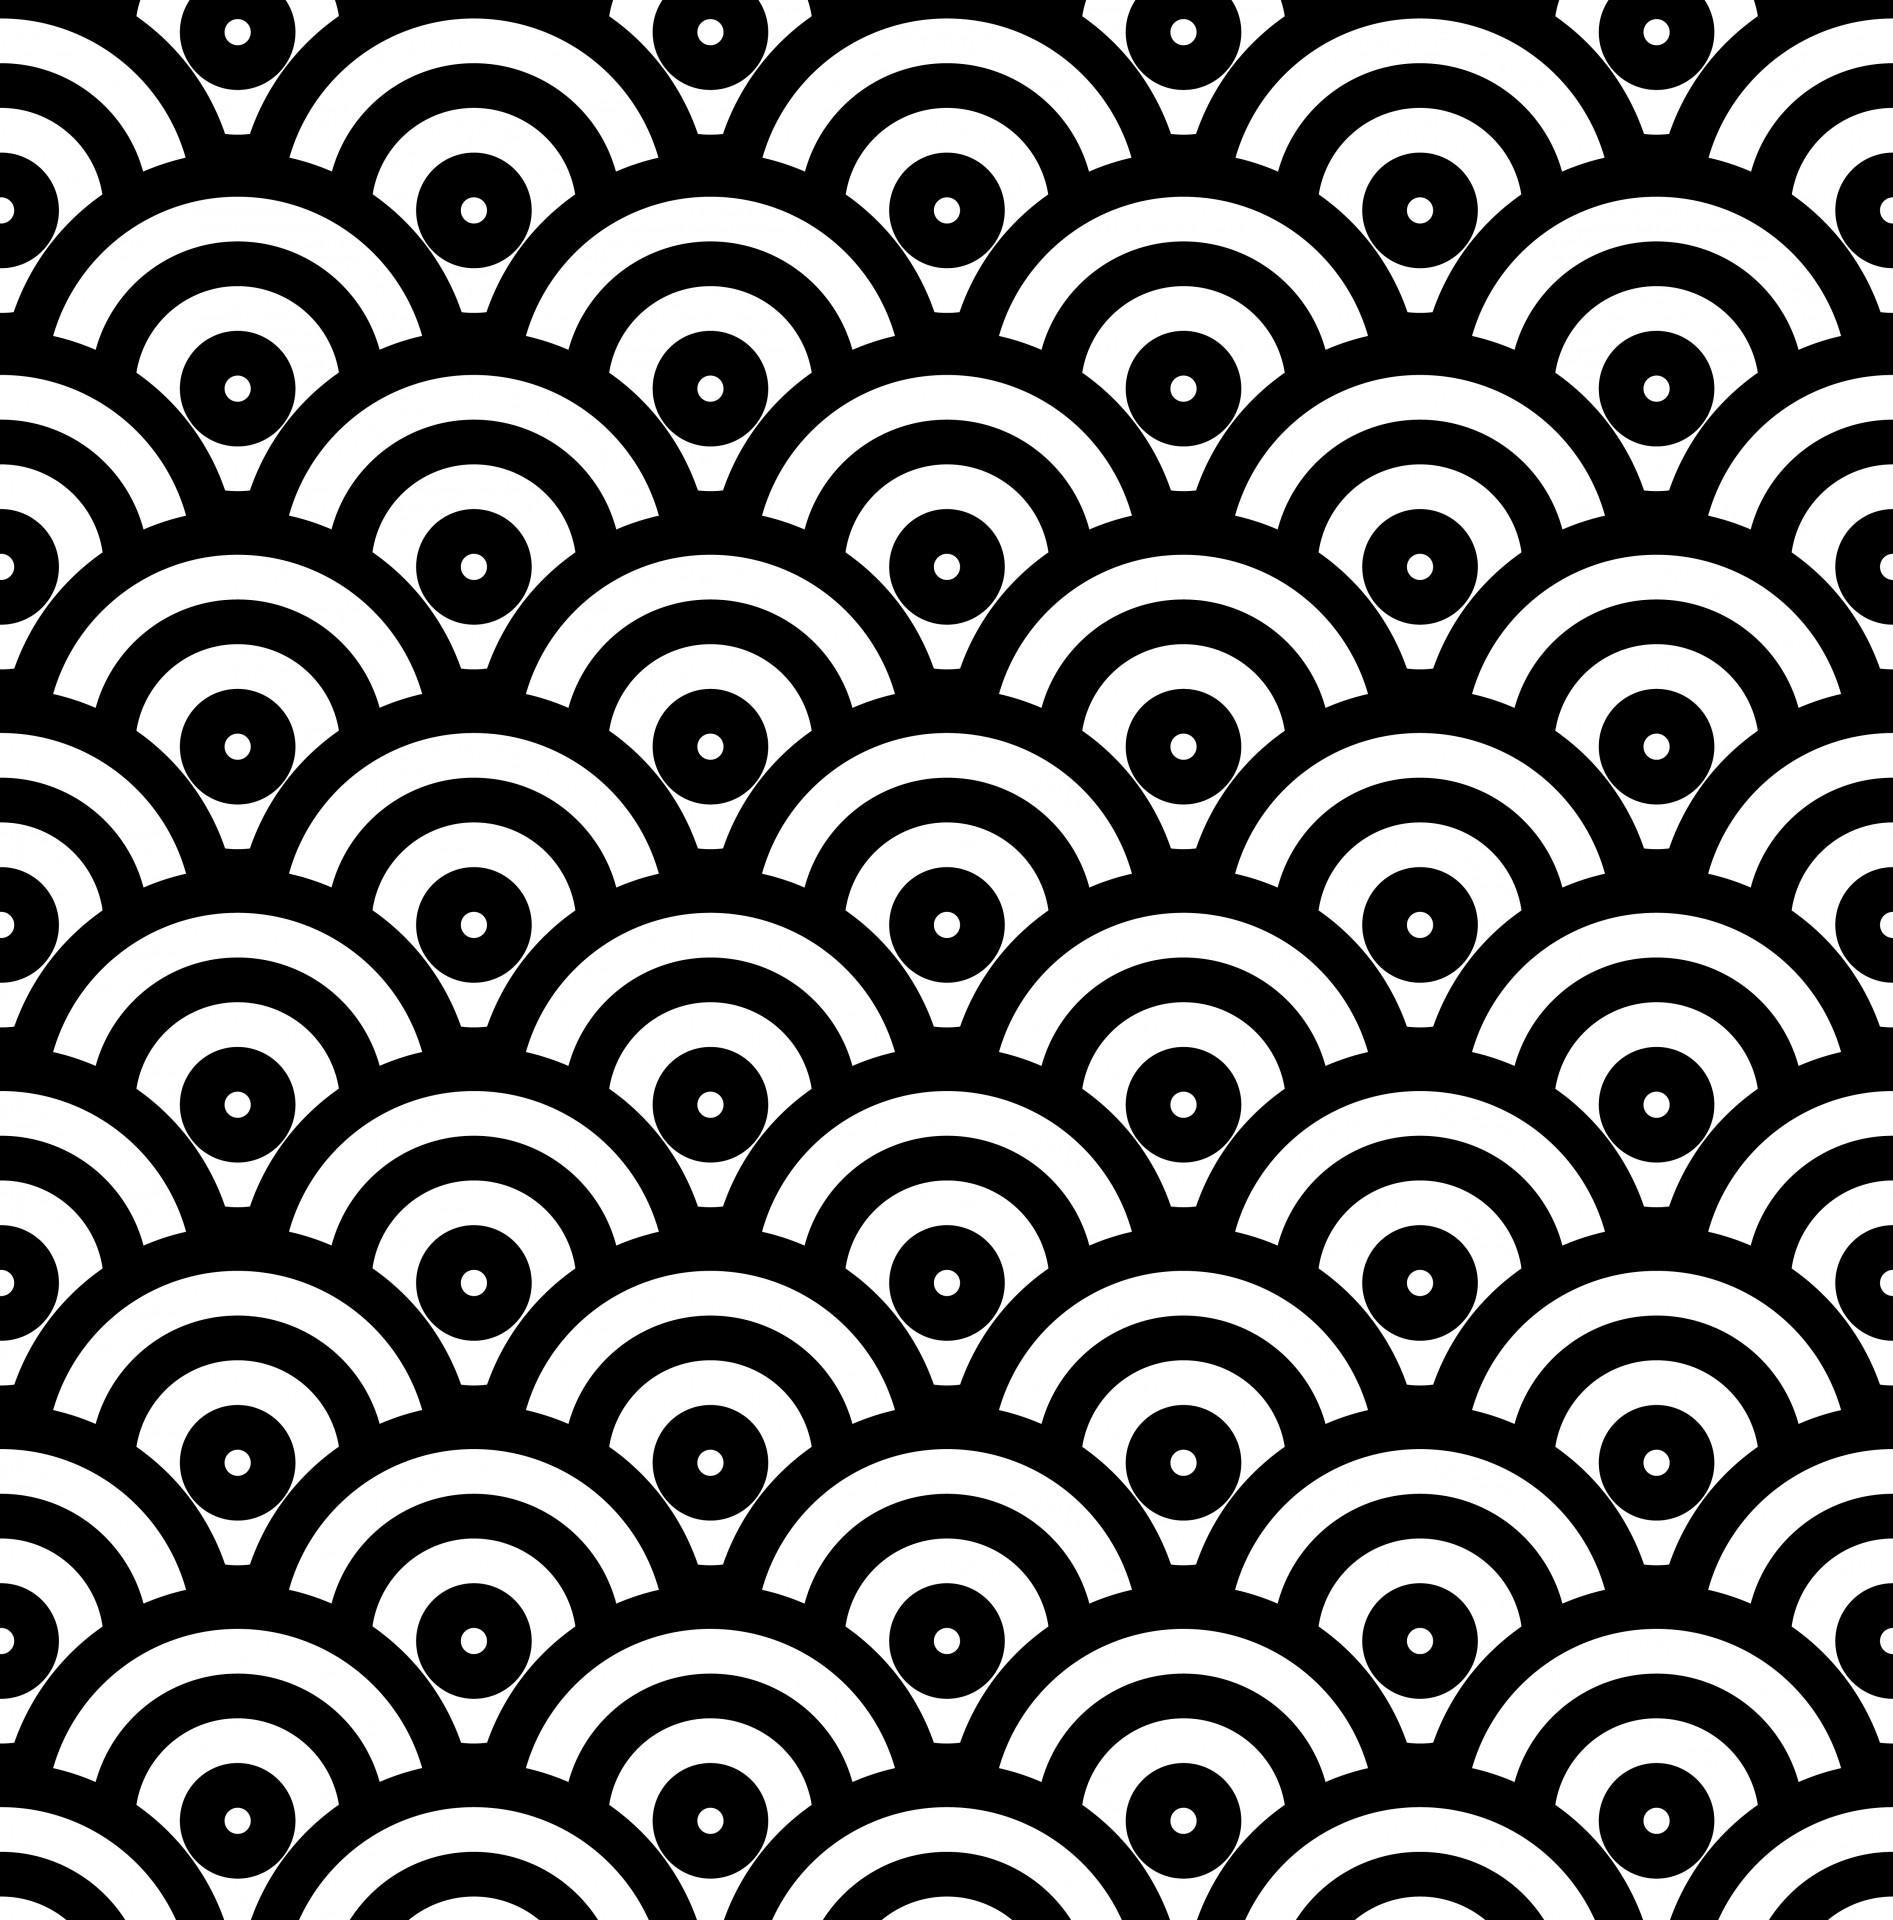 Black and white japanese wave wallpaper pattern background